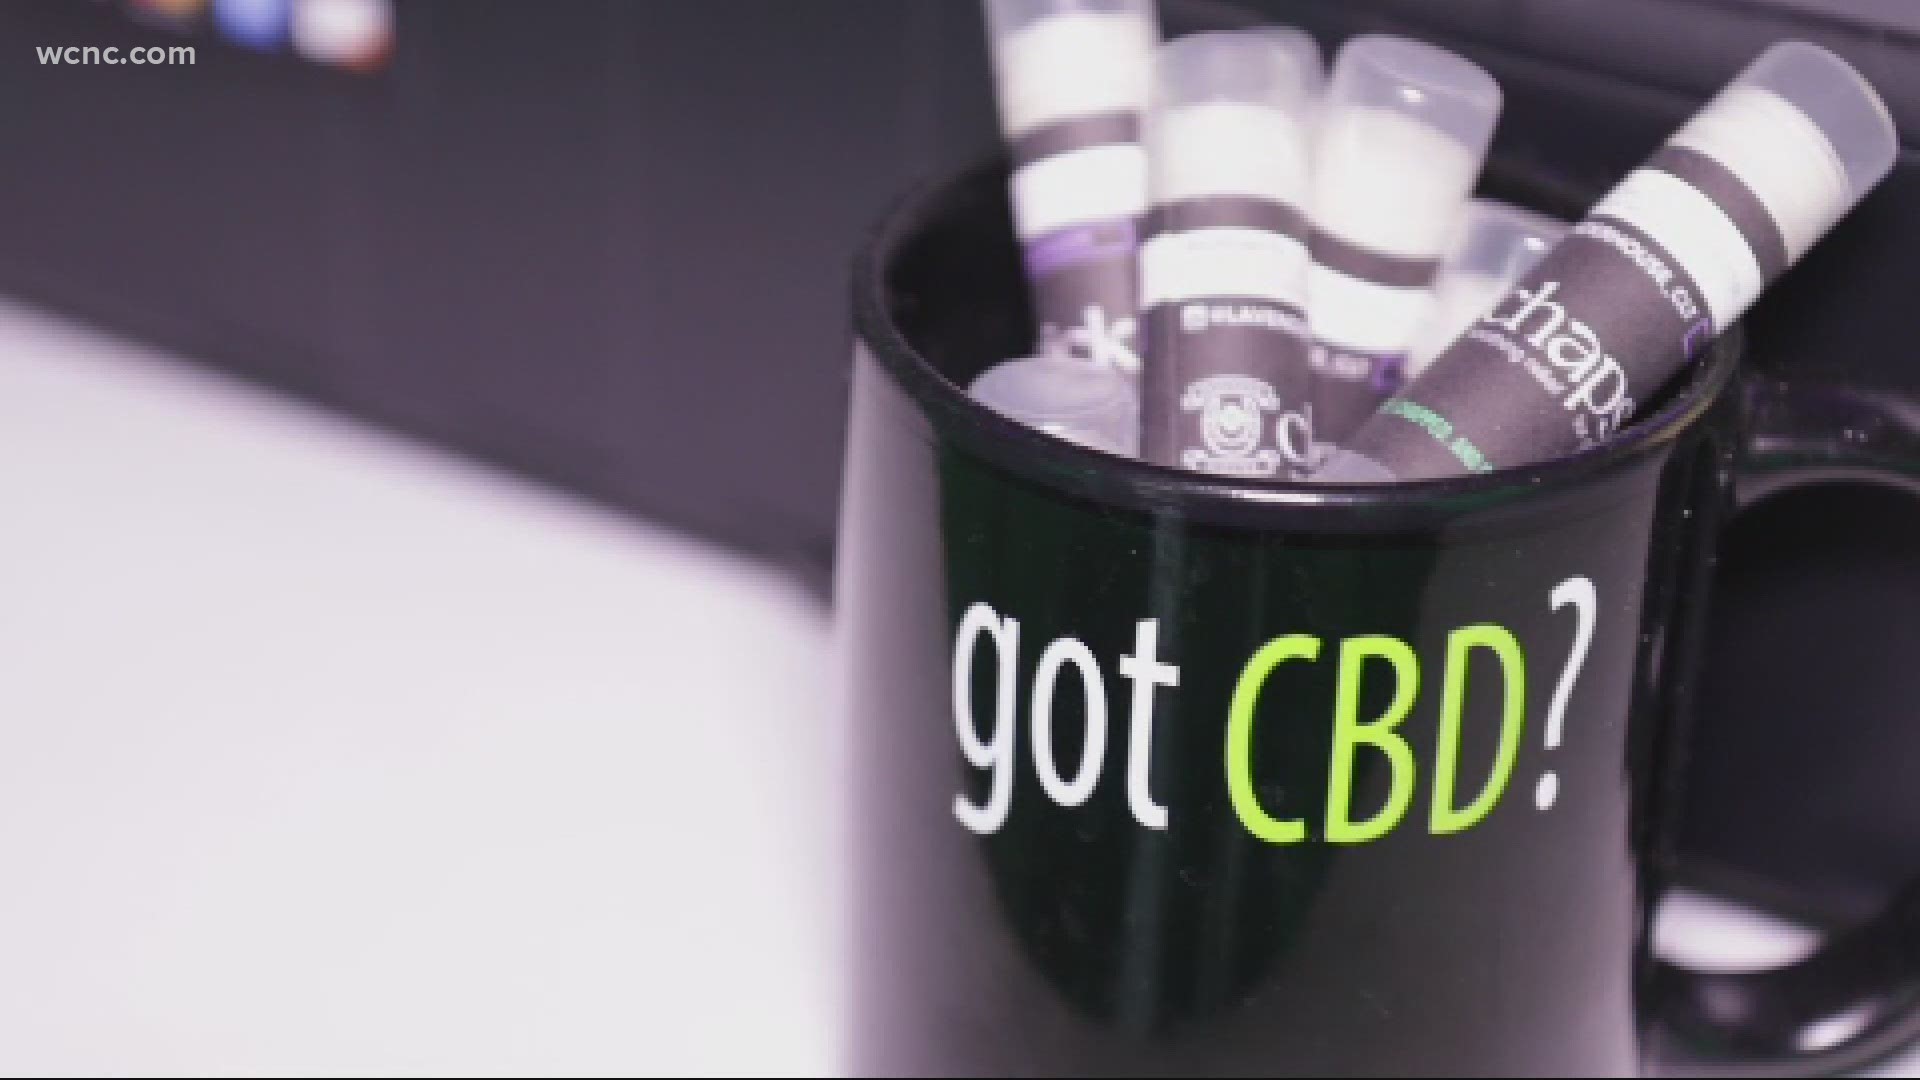 The CBD industry is booming as it's used to treat many ailments; however, the industry is lacking diversity. One couple hopes to change that.